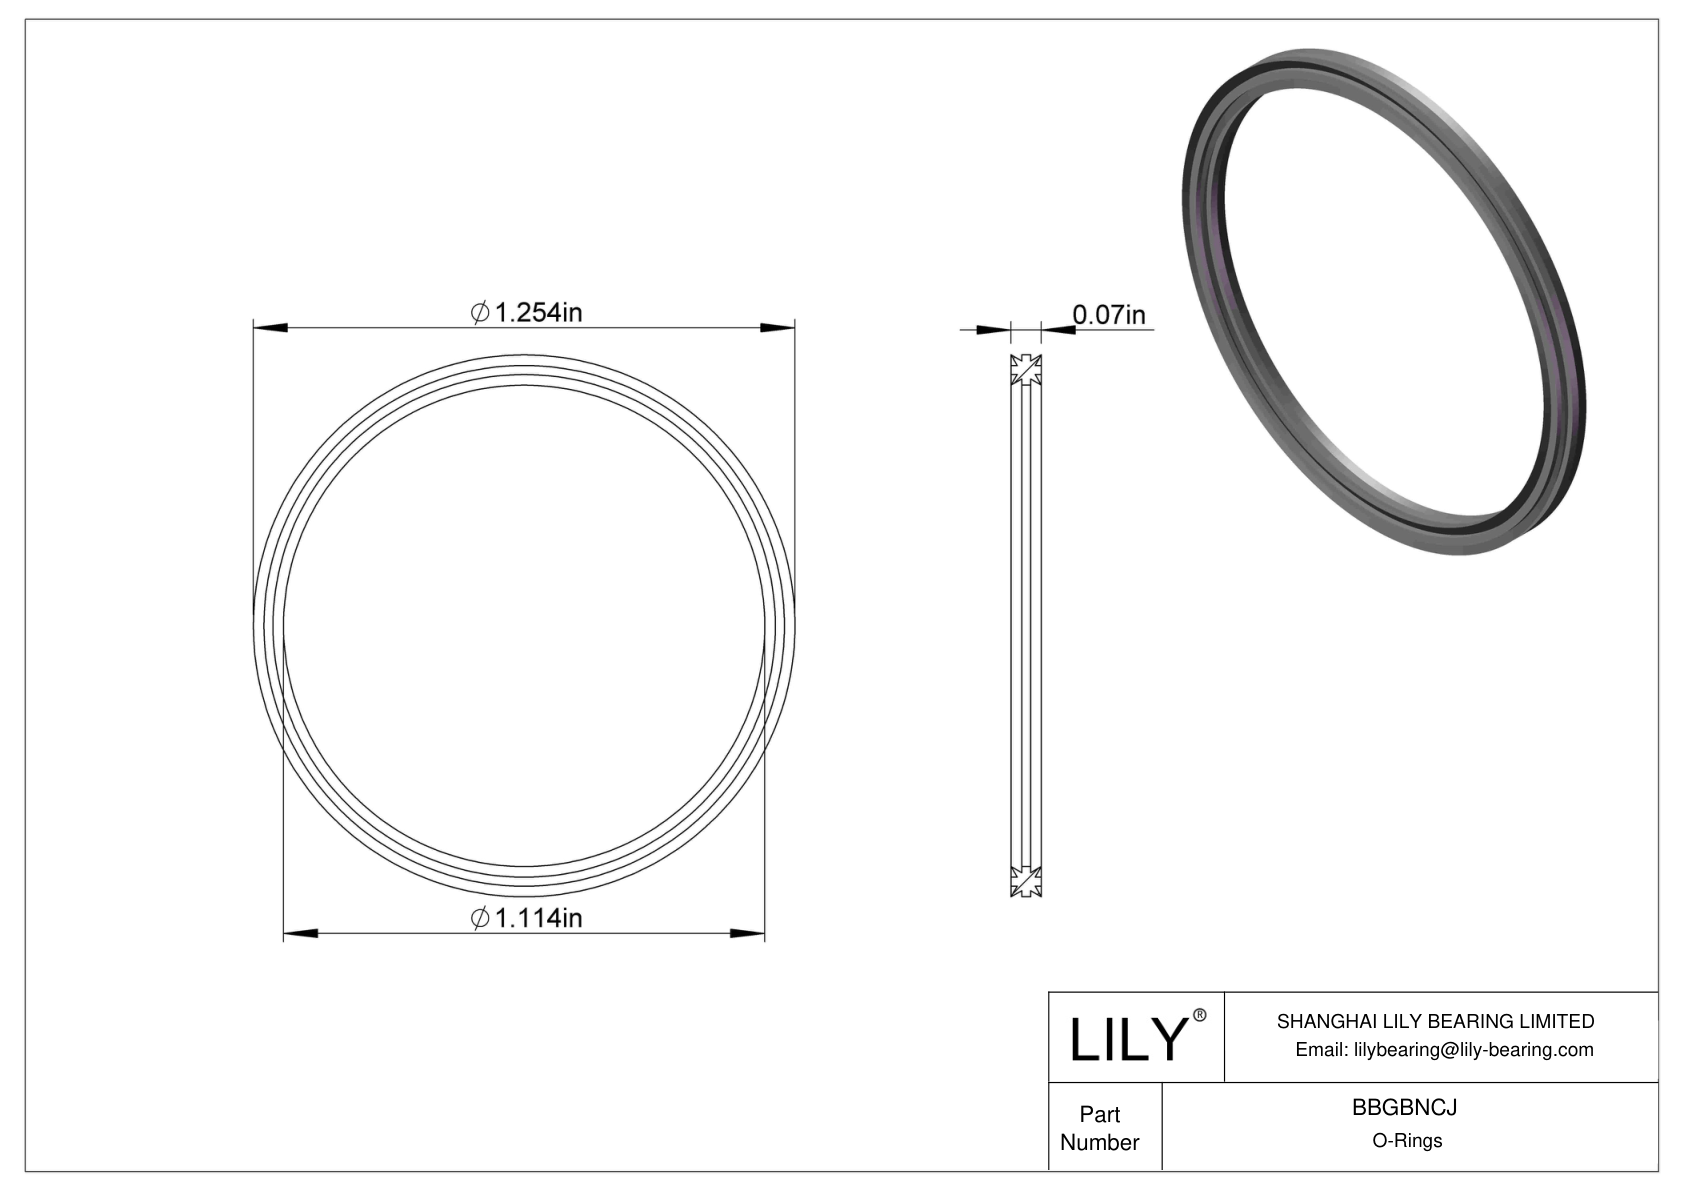 BBGBNCJ Oil Resistant O-Rings Double X cad drawing